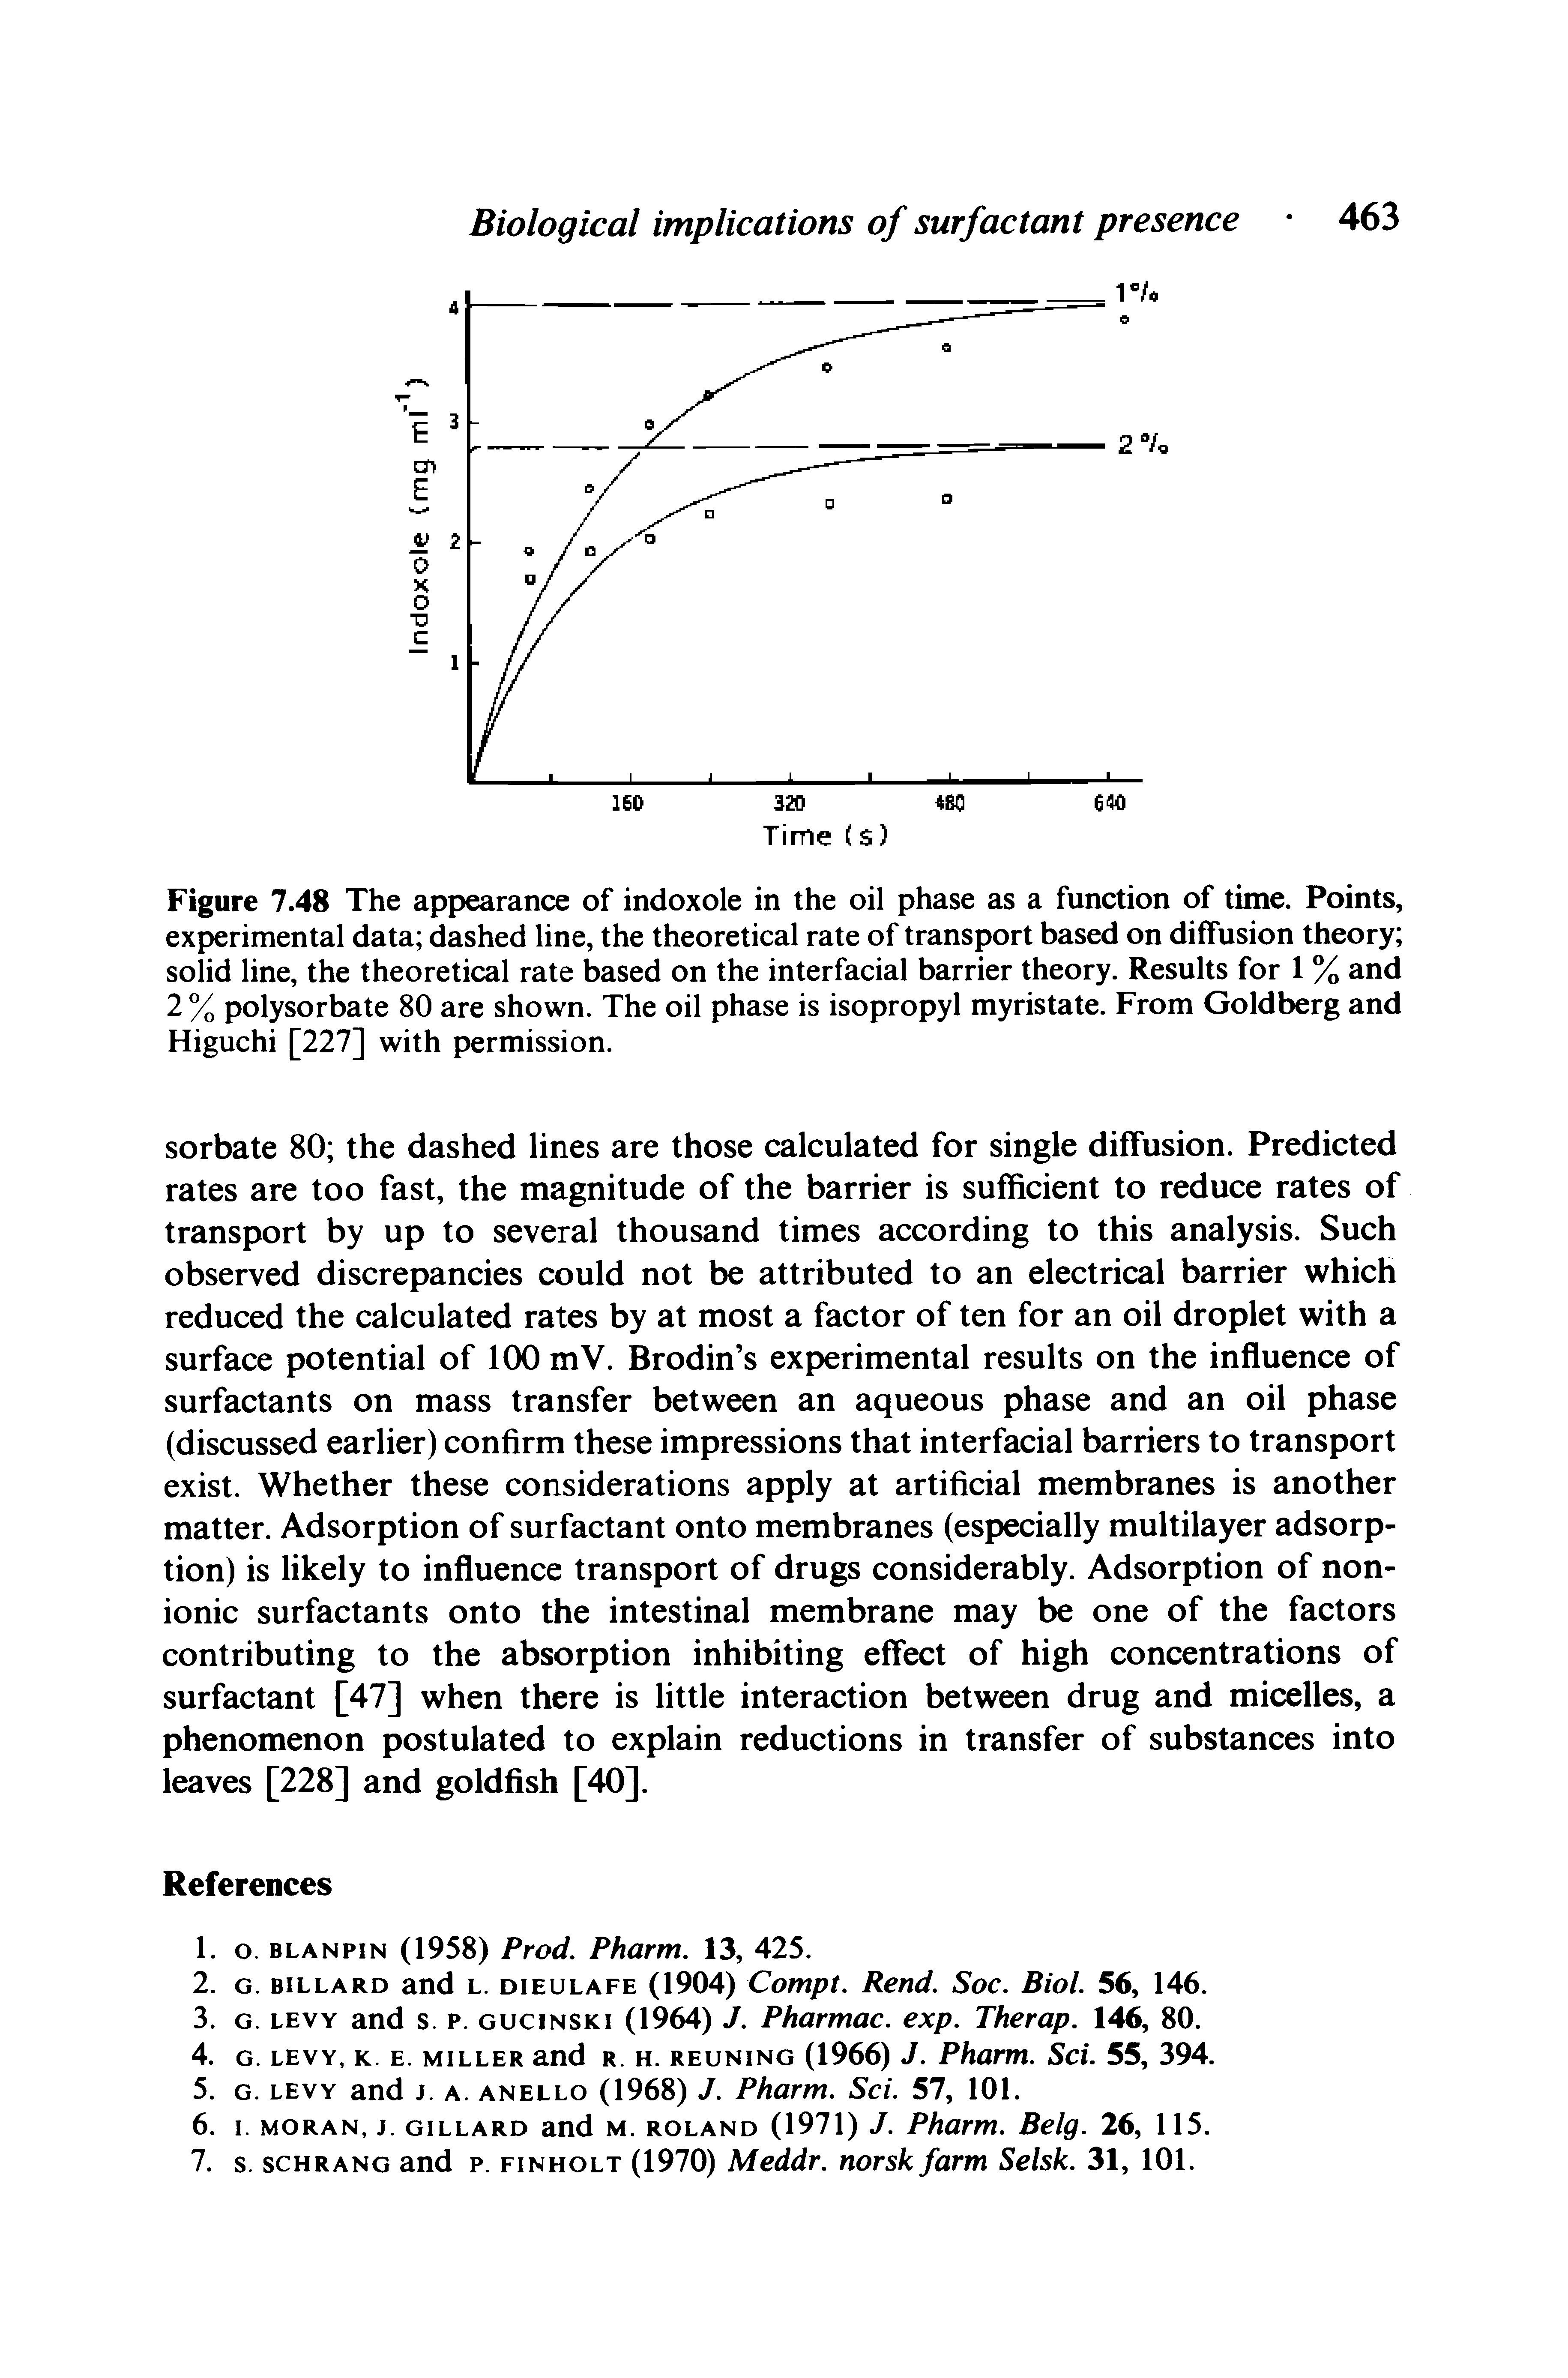 Figure 7.48 The appearance of indoxole in the oil phase as a function of time. Points, experimental data dashed line, the theoretical rate of transport based on diffusion theory solid line, the theoretical rate based on the interfacial barrier theory. Results for 1 % and 2 % polysorbate 80 are shown. The oil phase is isopropyl myristate. From Goldberg and Higuchi [227] with permission.